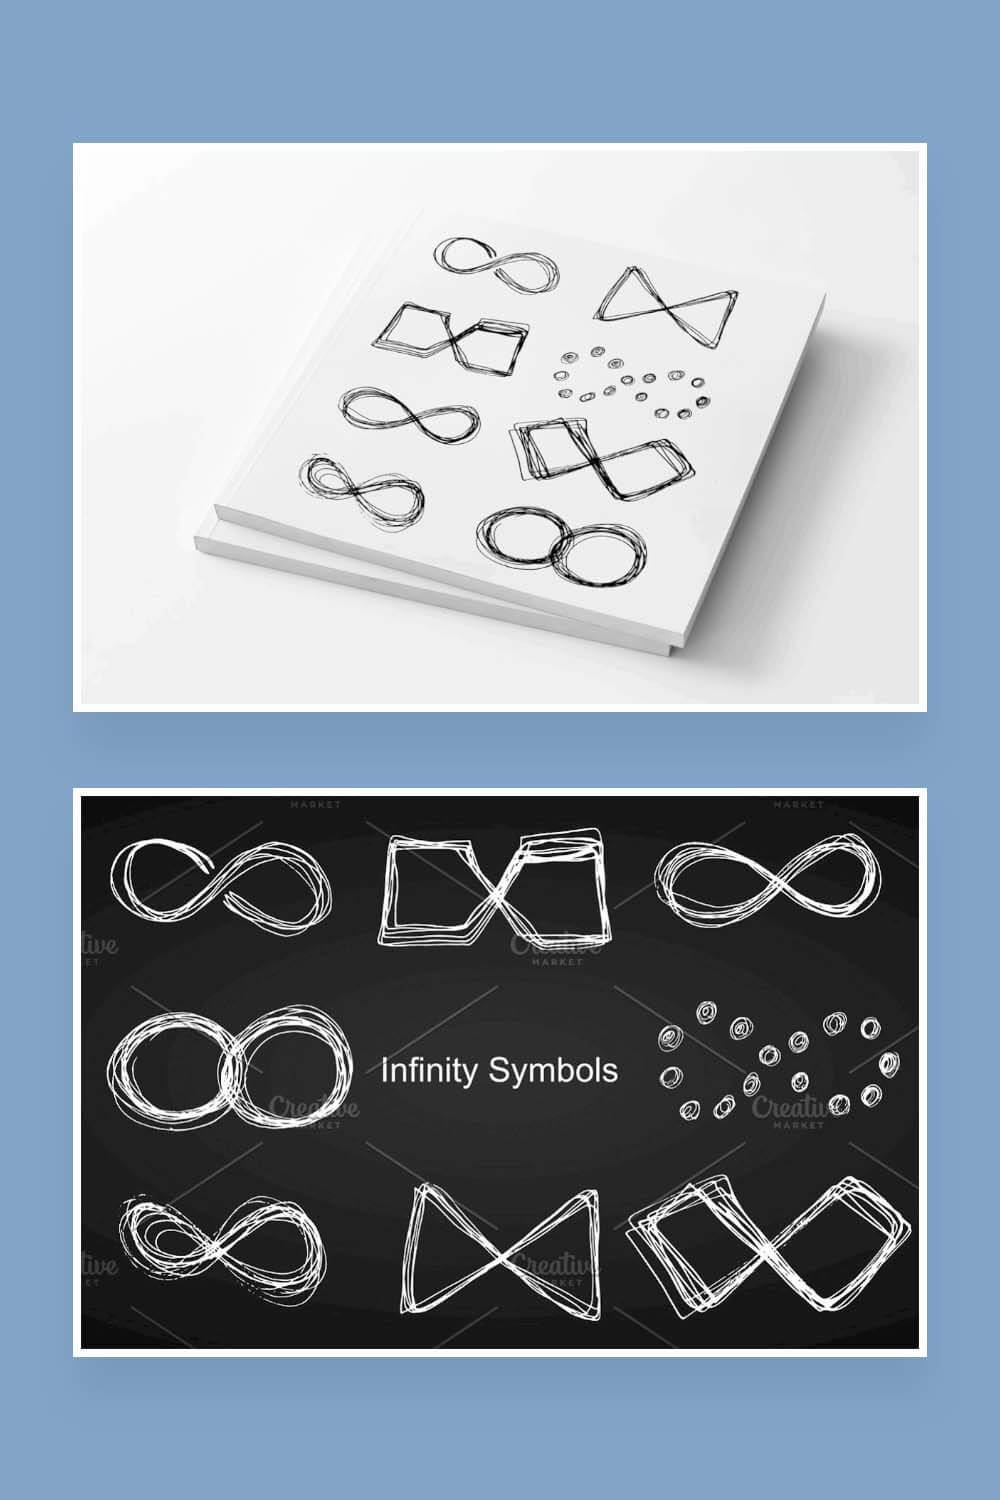 Two hand drawn infinity designs on white and black backgrounds.